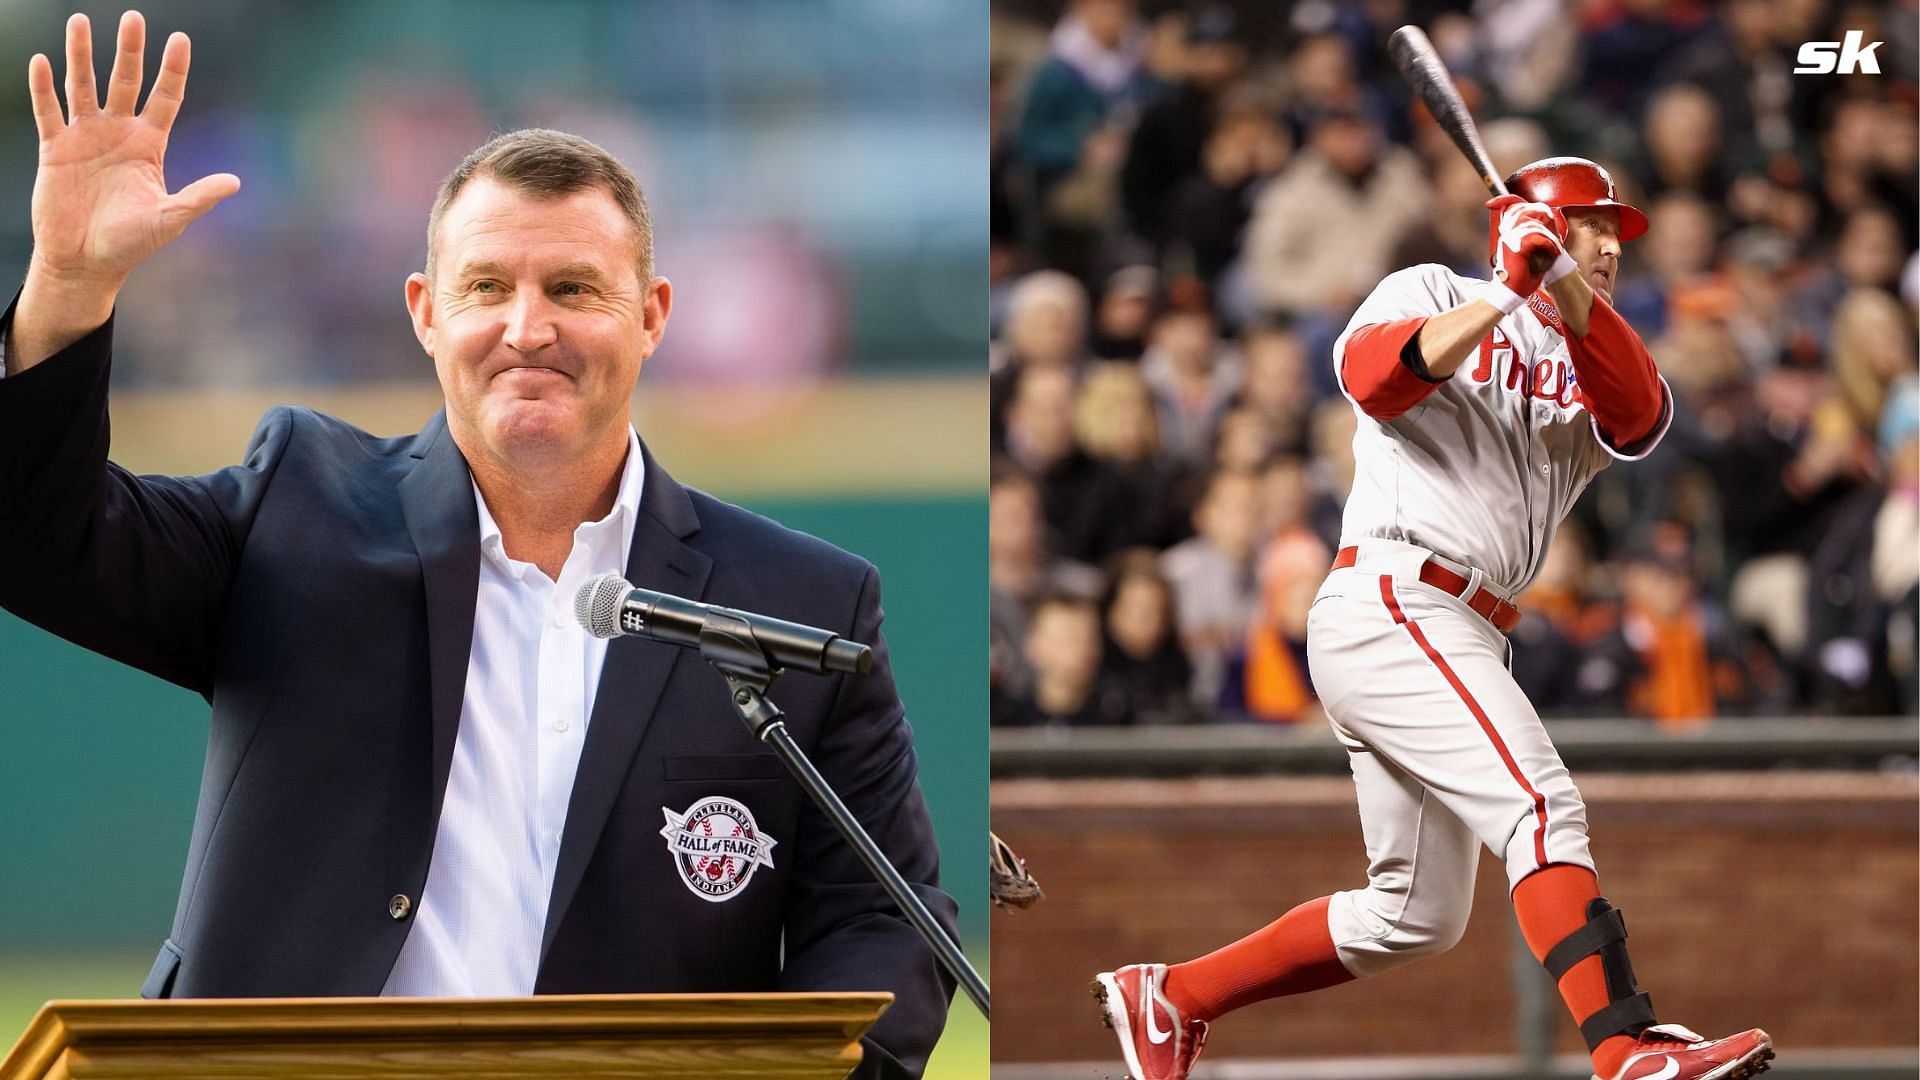 Jim Thome: Jim Thome took pride in never taking PEDs in his career: It was  never a thought that I would even considered to do it [Steroids]